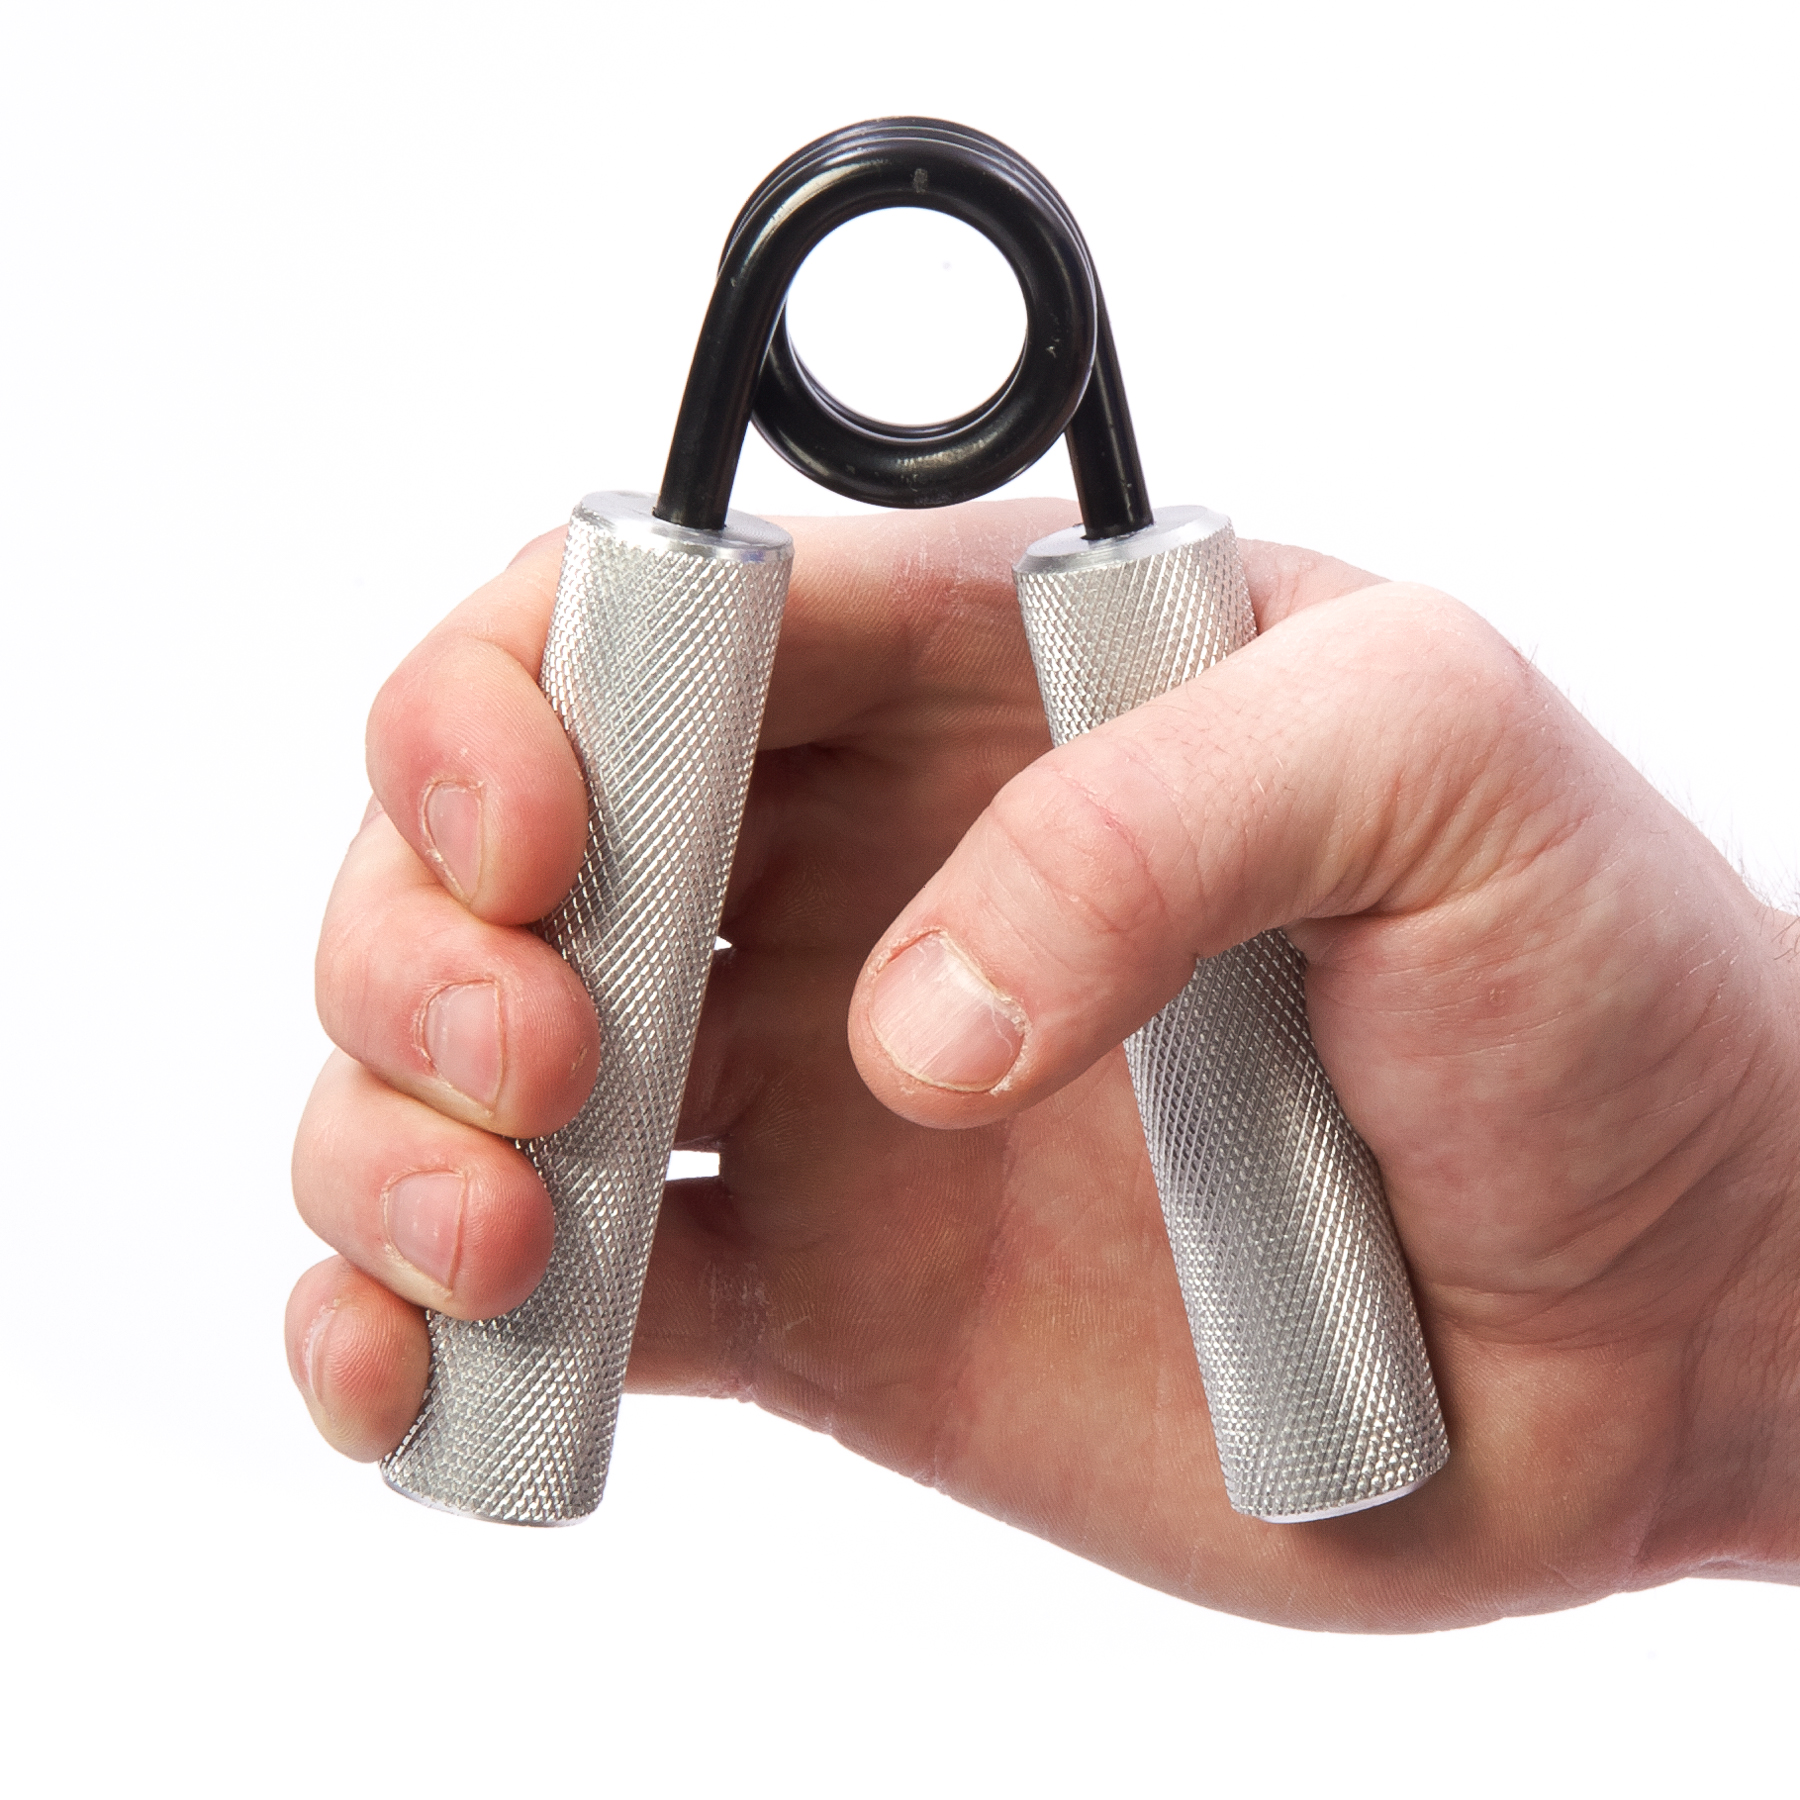 Mountain Products Hand and Exercise Grip Strengthener - Black Mountain Products